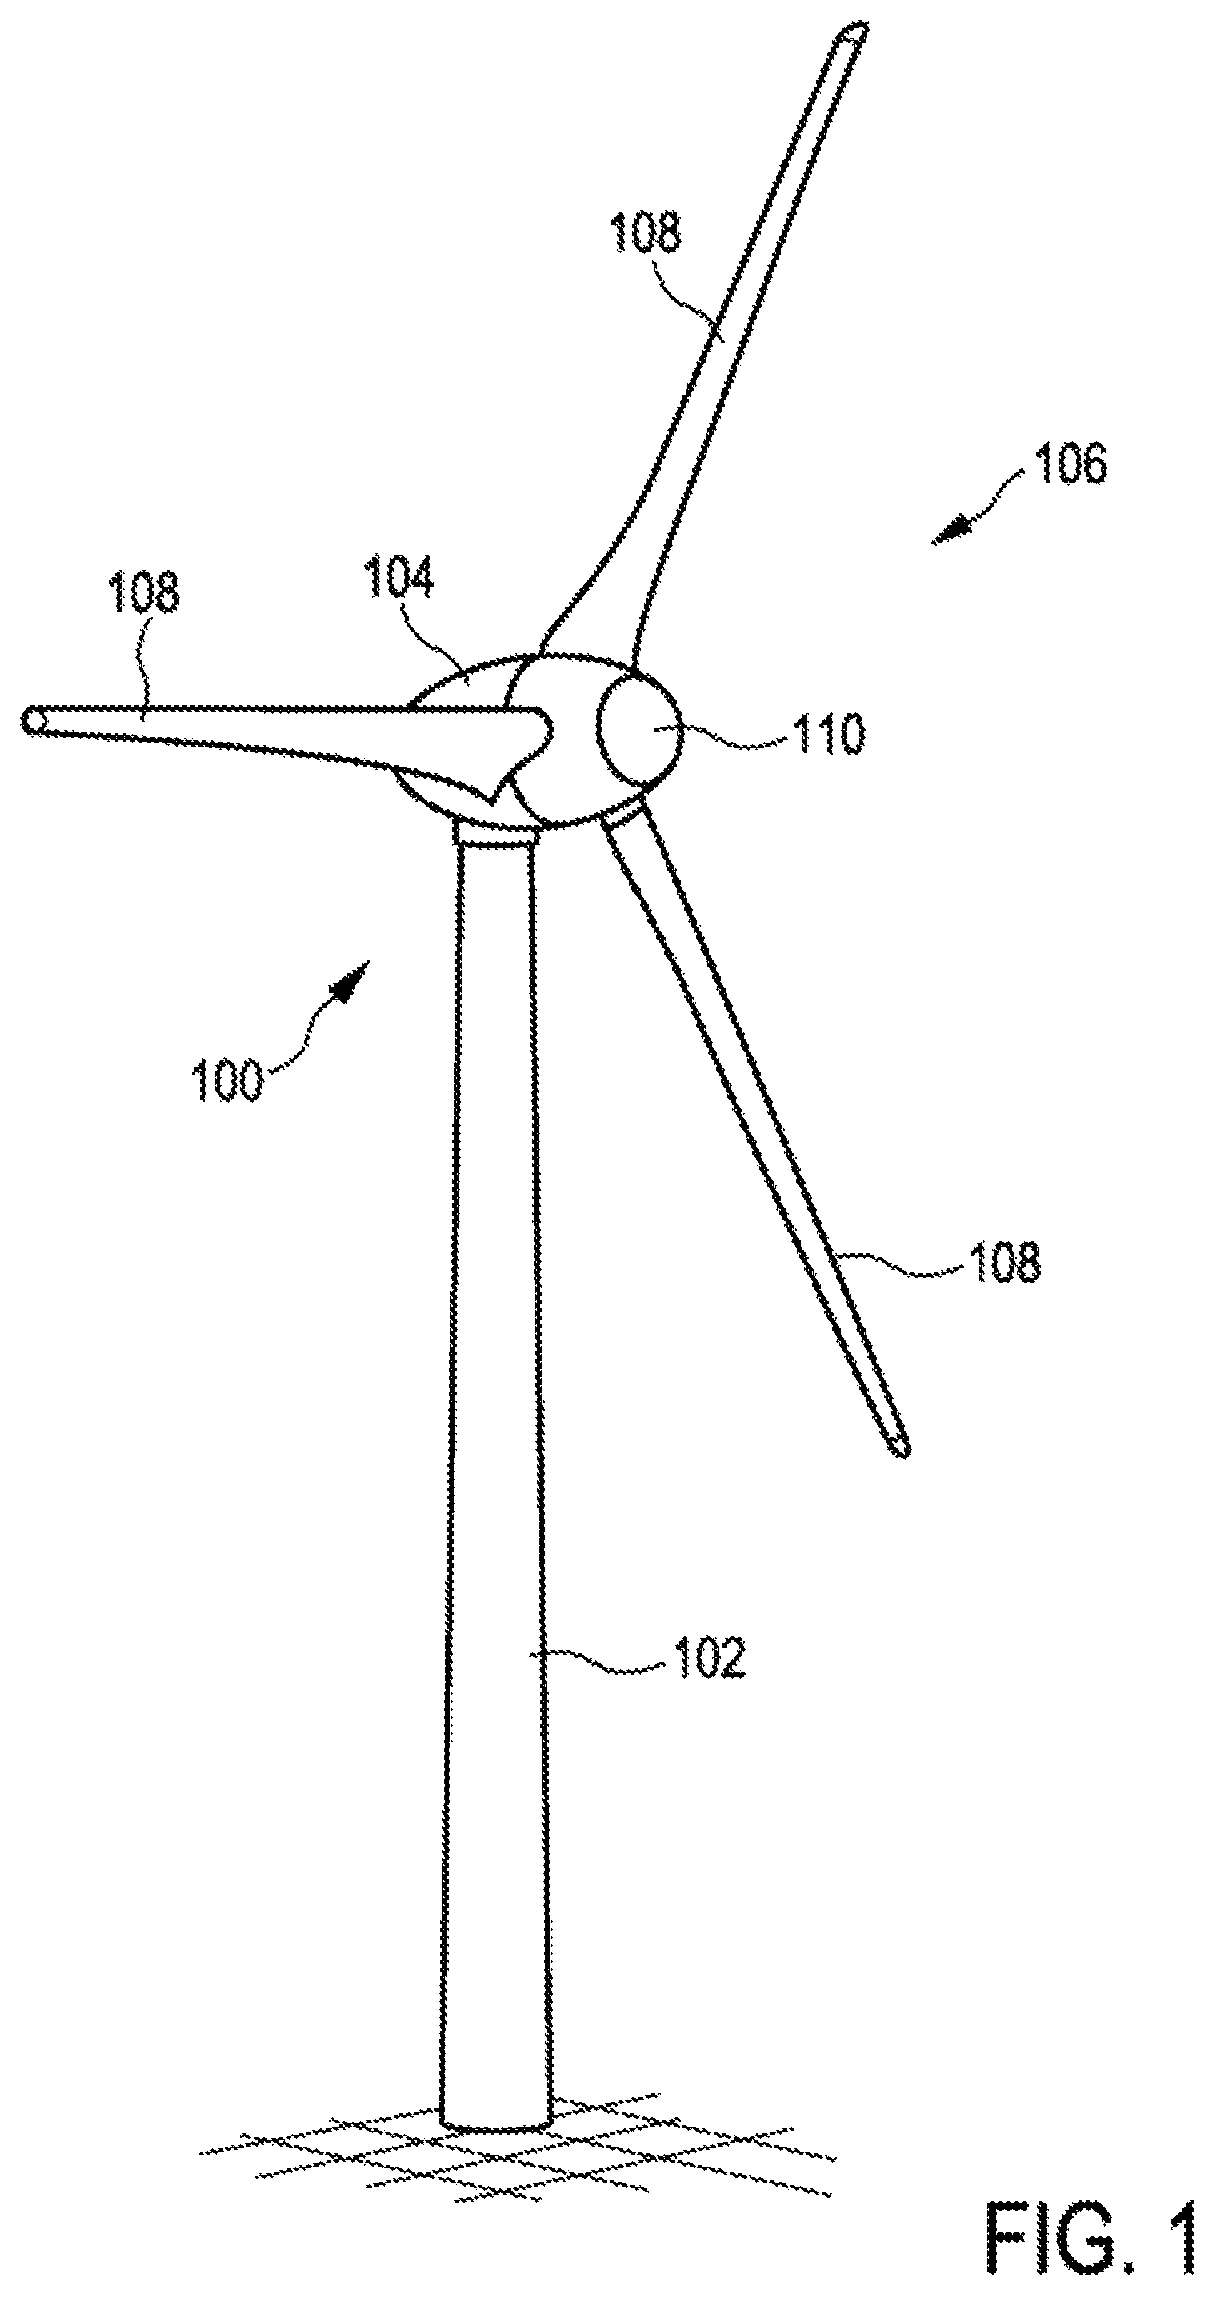 Method for determining an azimuth angle of a wind turbine